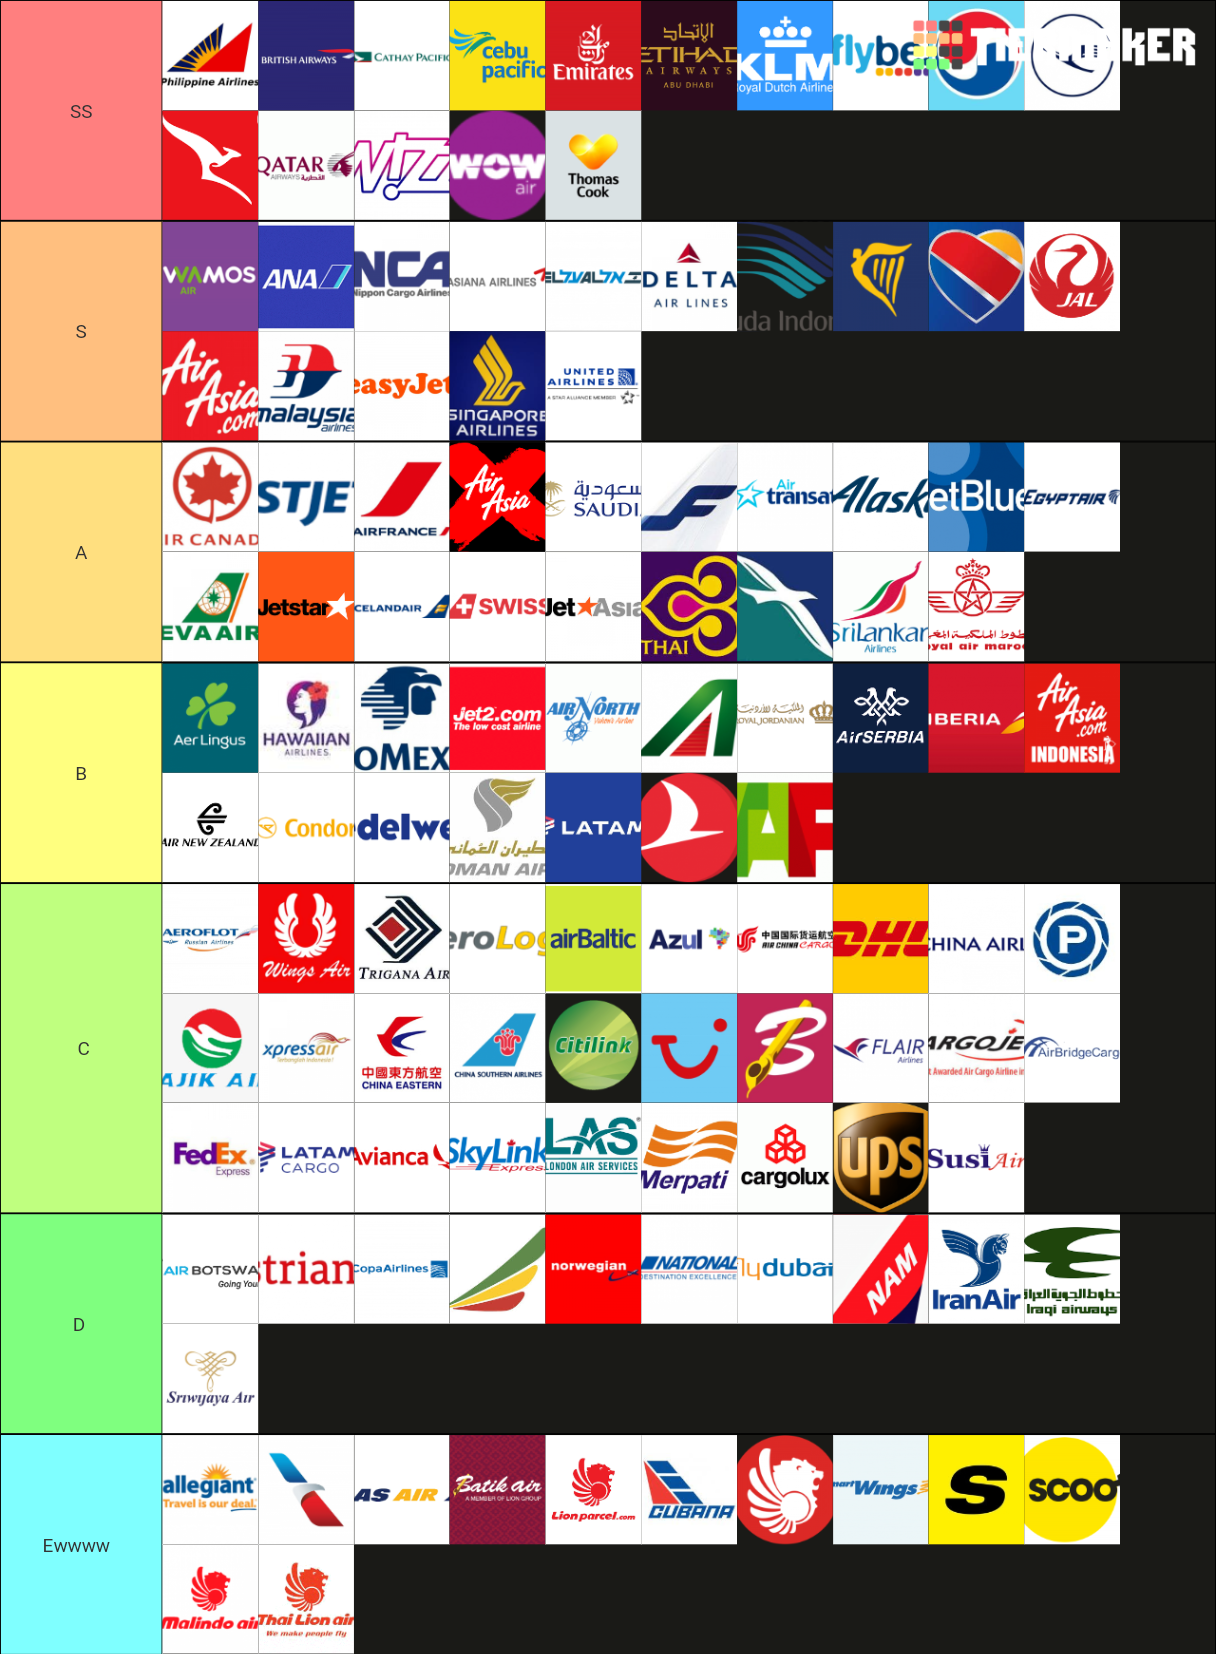 Airline In All World Tier List Rankings) TierMaker